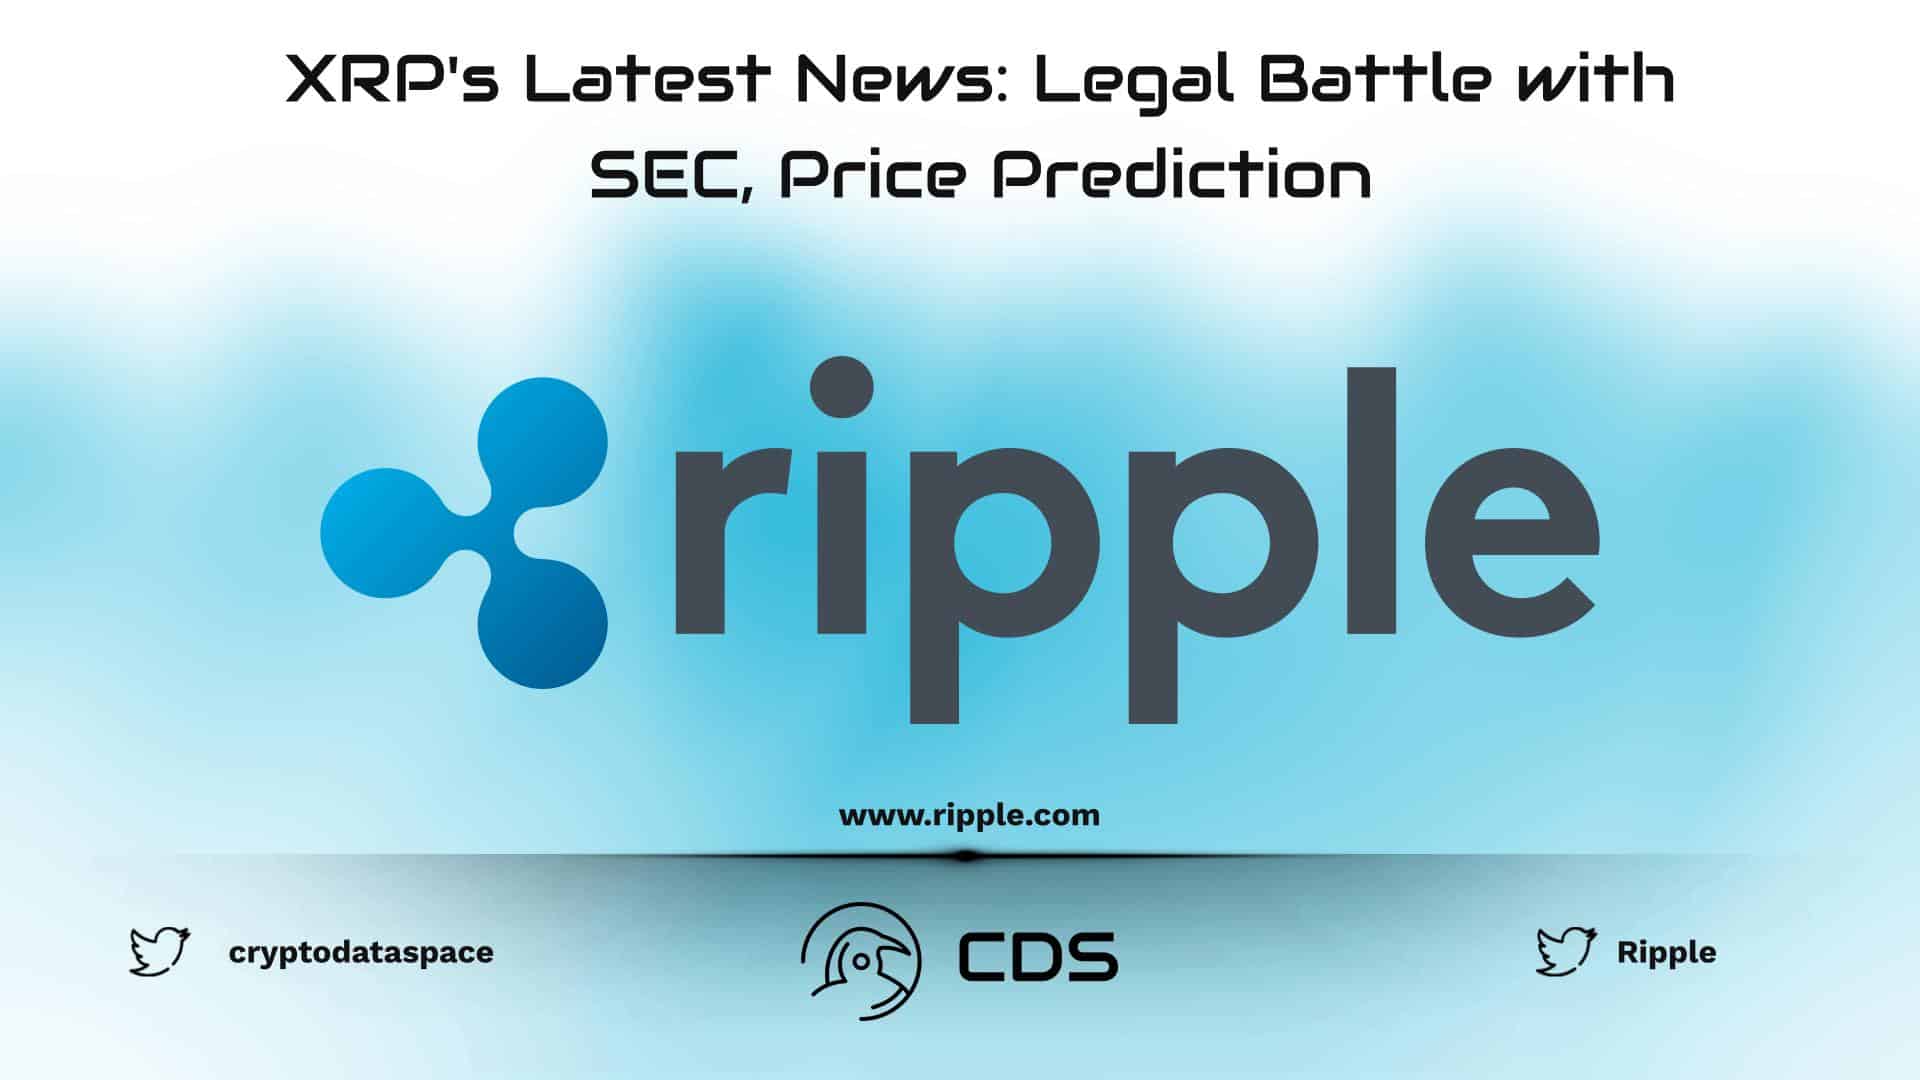 XRP's Latest News: Legal Battle with SEC, Price Prediction